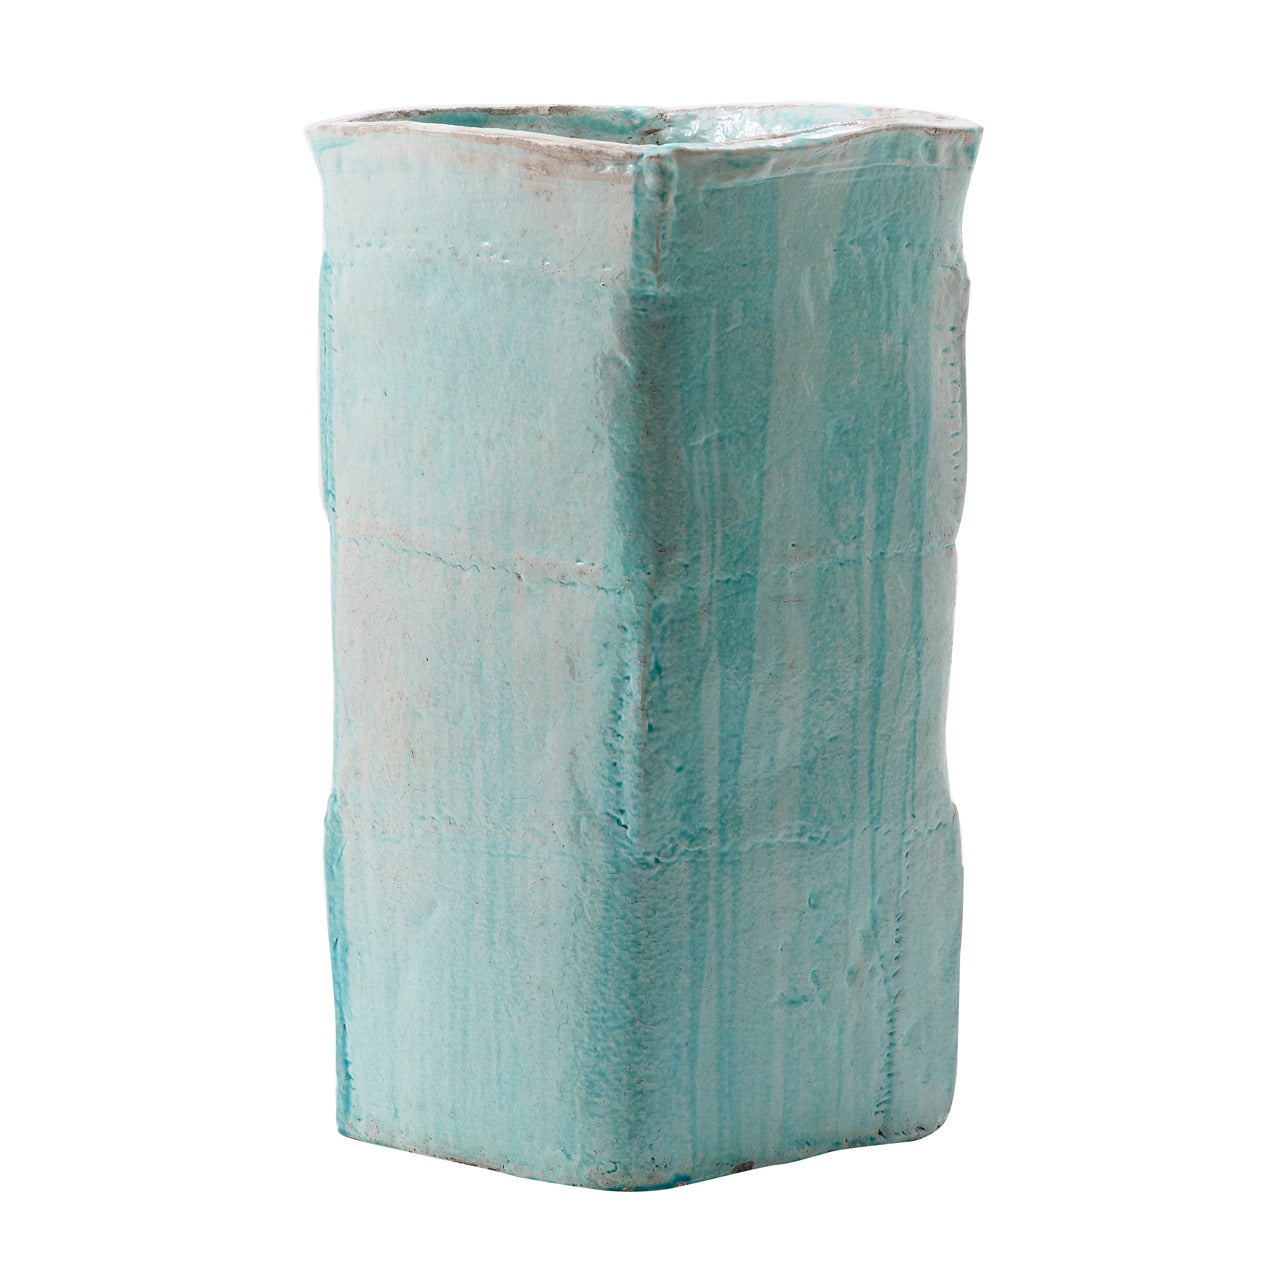 Blue Square Ceramic Planter by Lee Hun Chung, 2012 For Sale